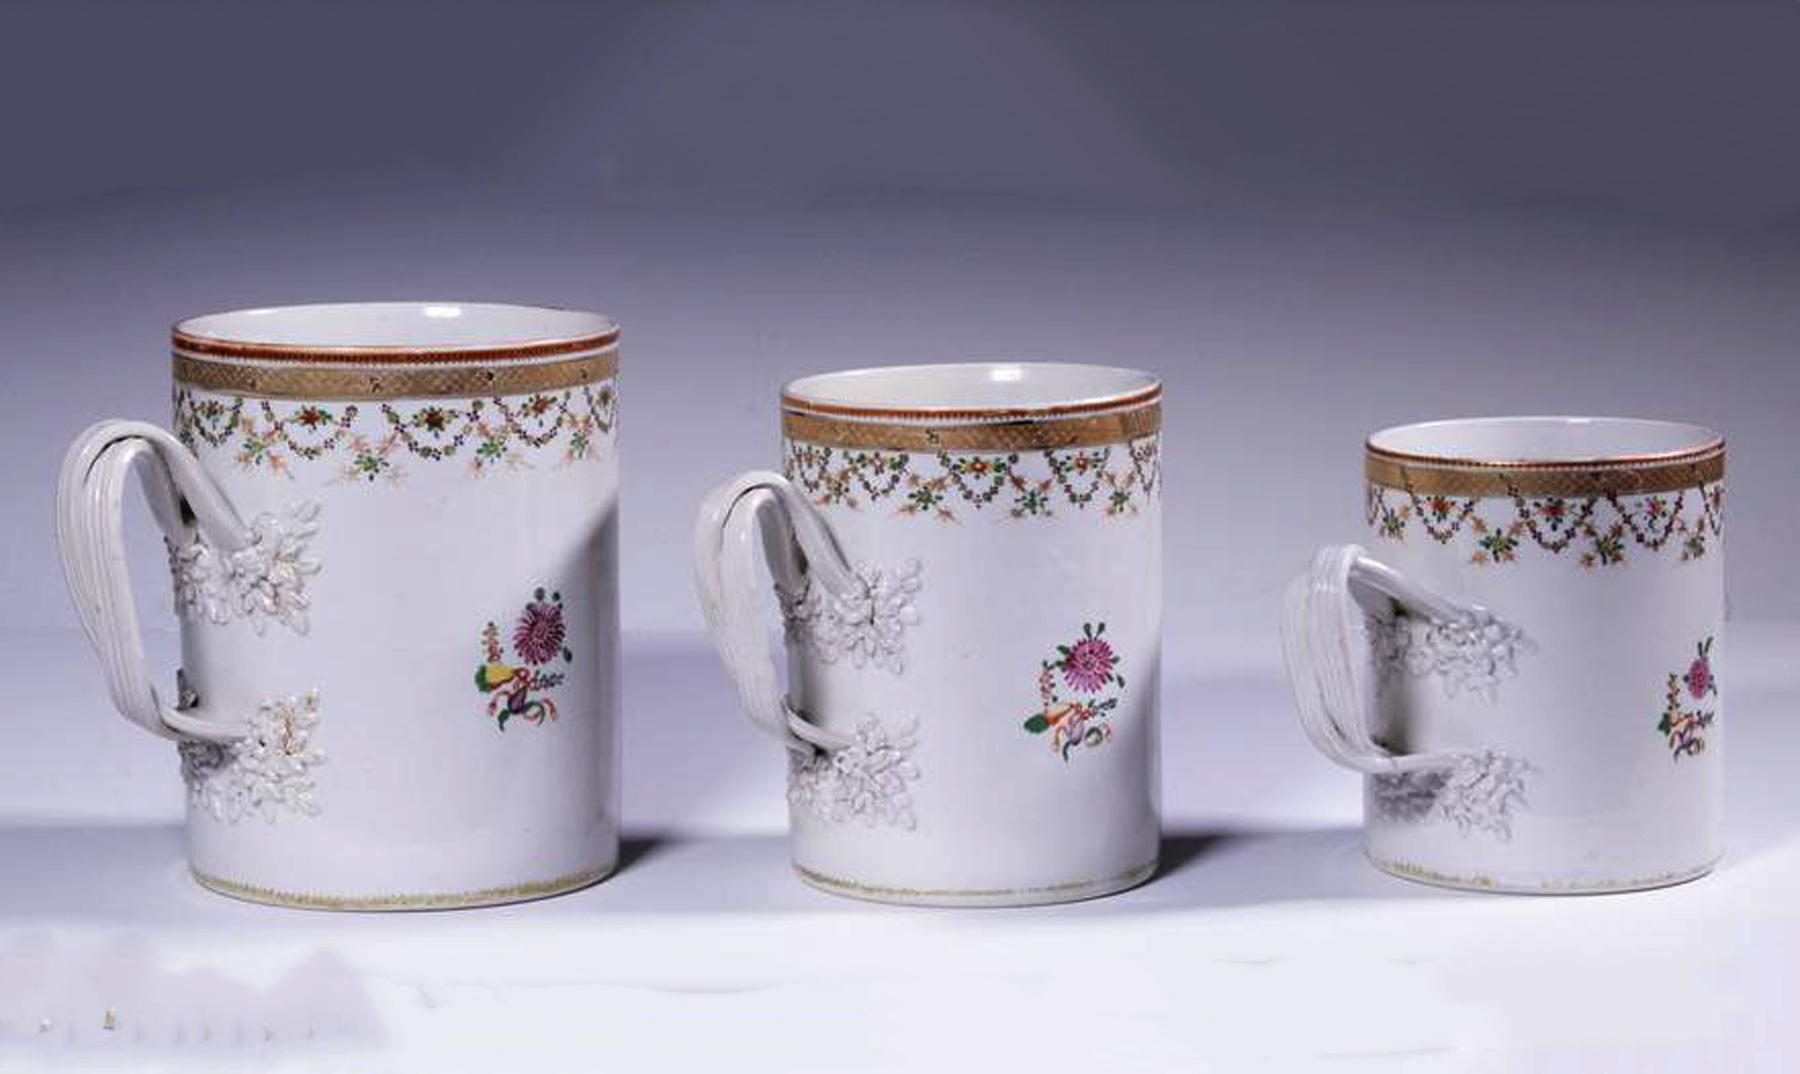 Chinese export porcelain set of graduated famille rose mugs or tankards,
Circa 1780

The Chinese Export porcelain tankards or mugs are each enameled with a neoclassic urn design with flowers within a think green enamel circular circle. The rim